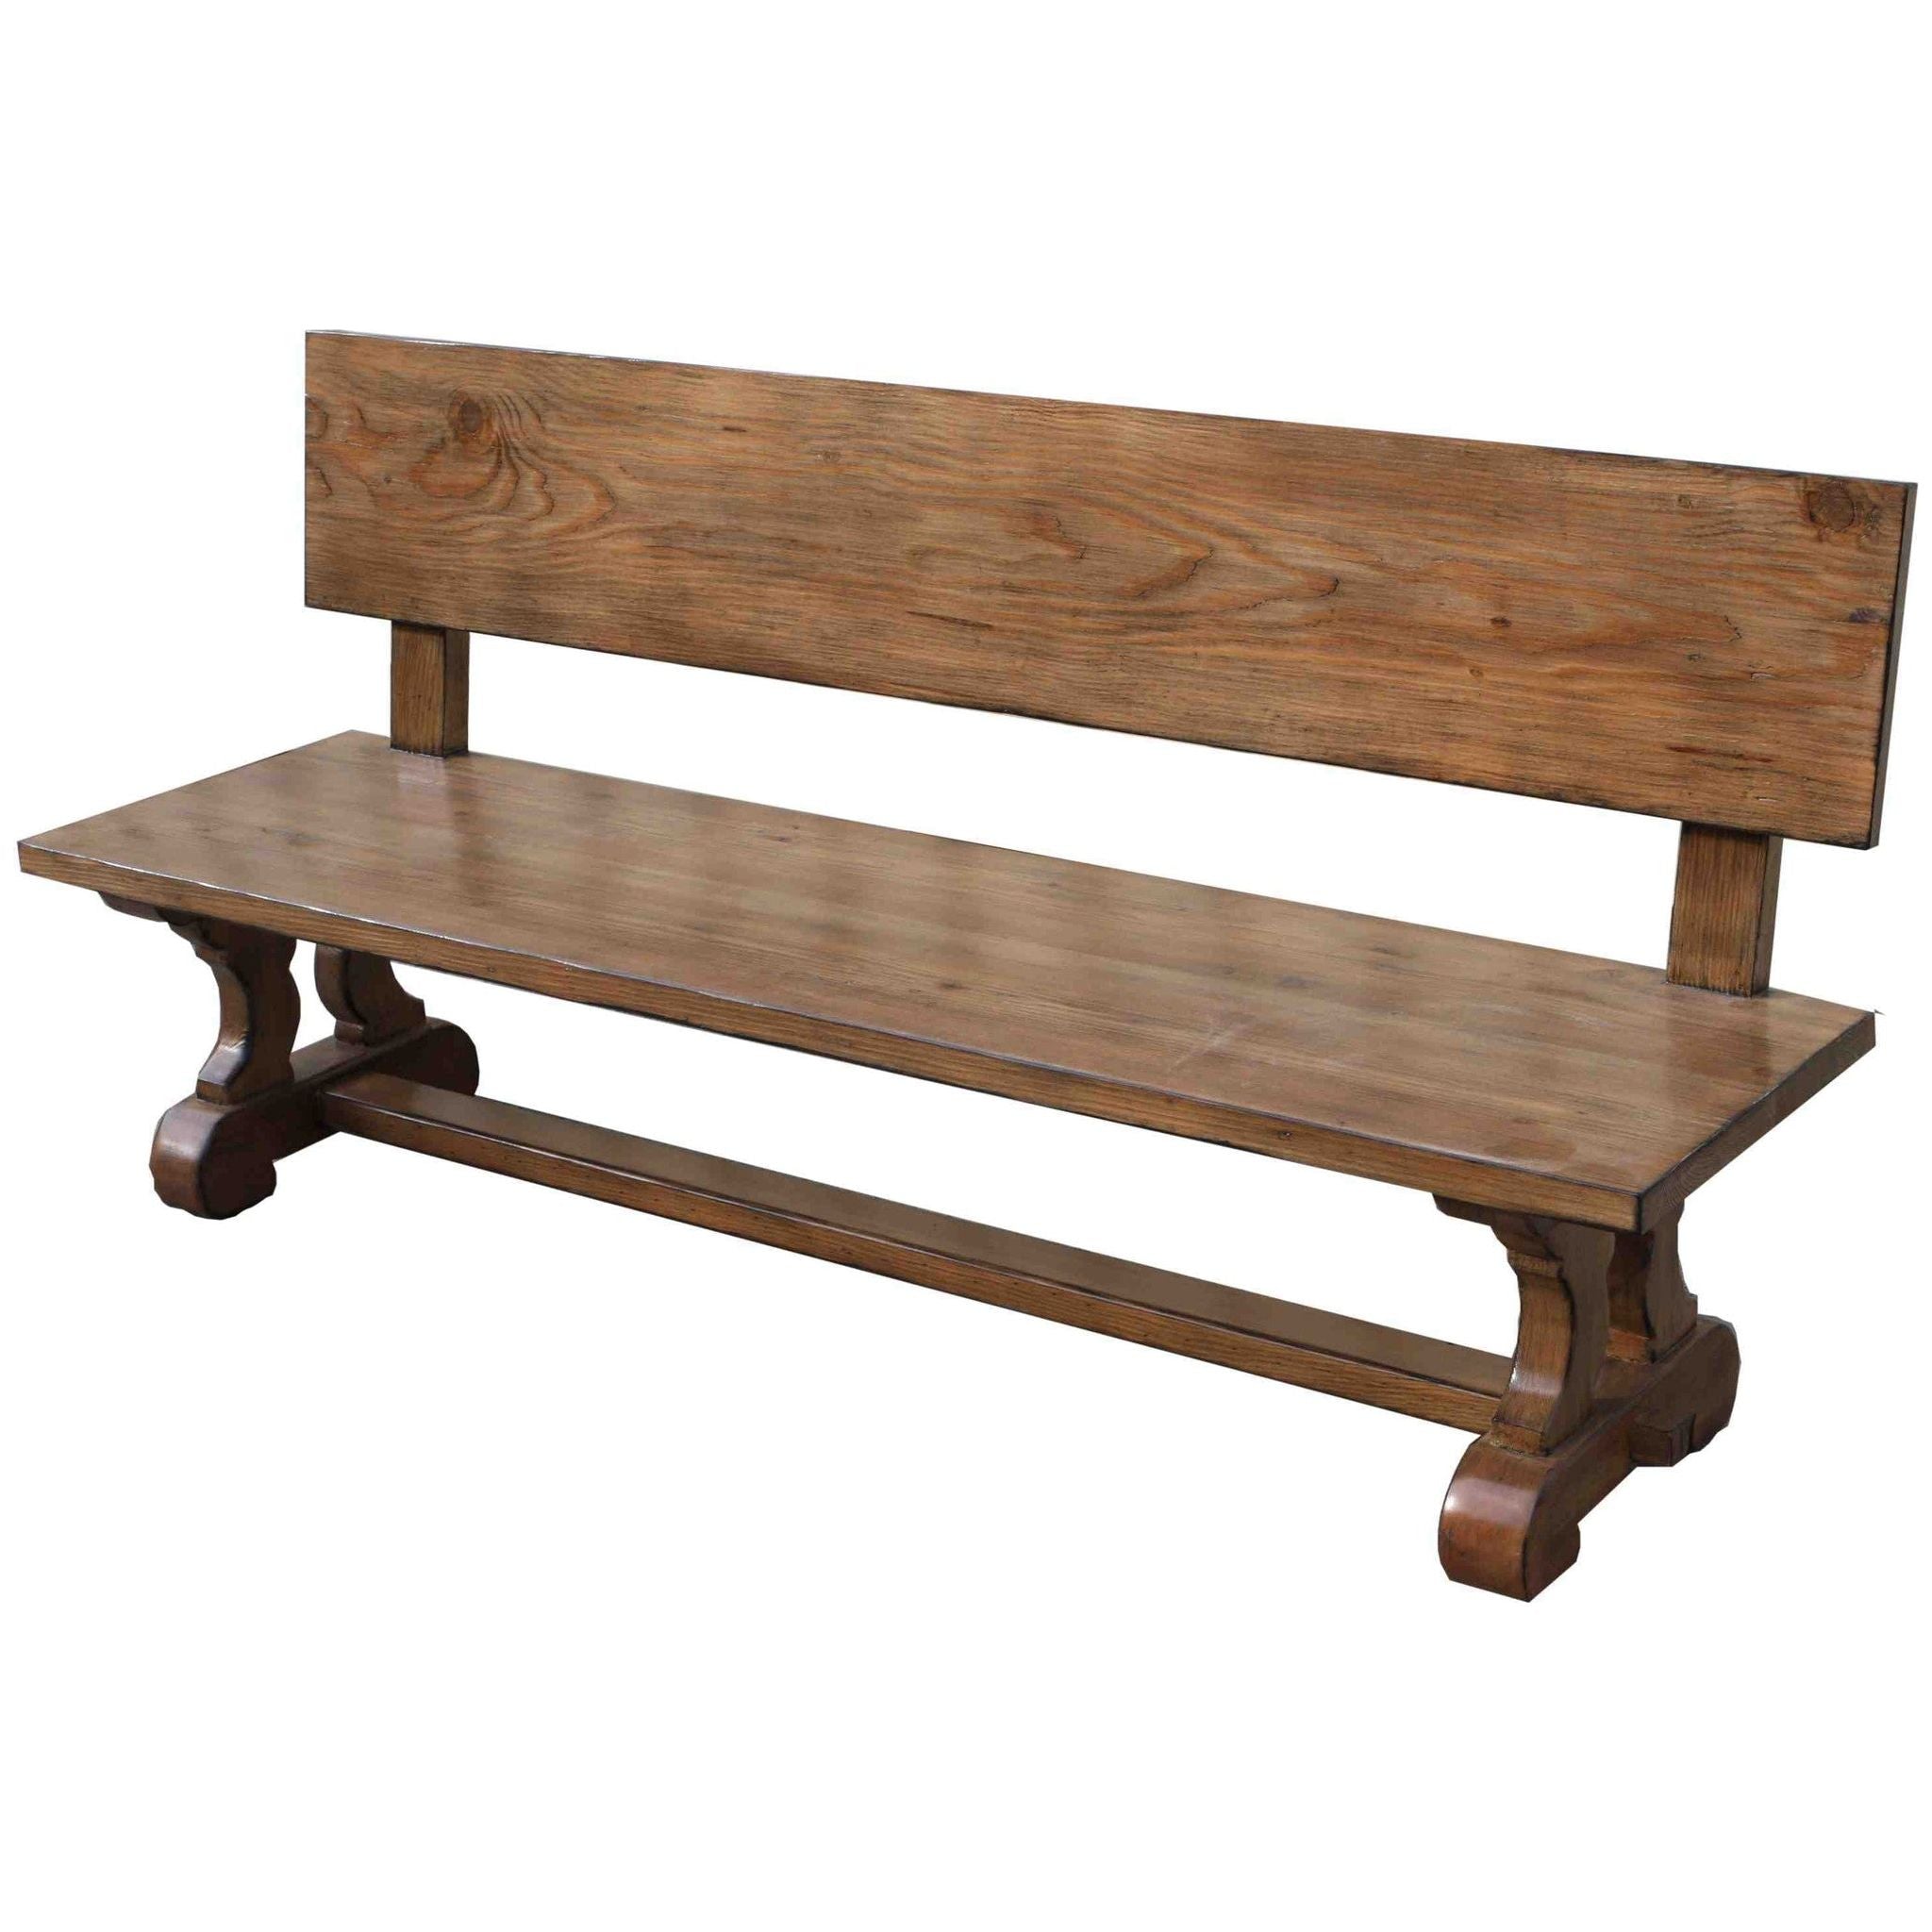 Gothic Bench featured in Reclaimed wood